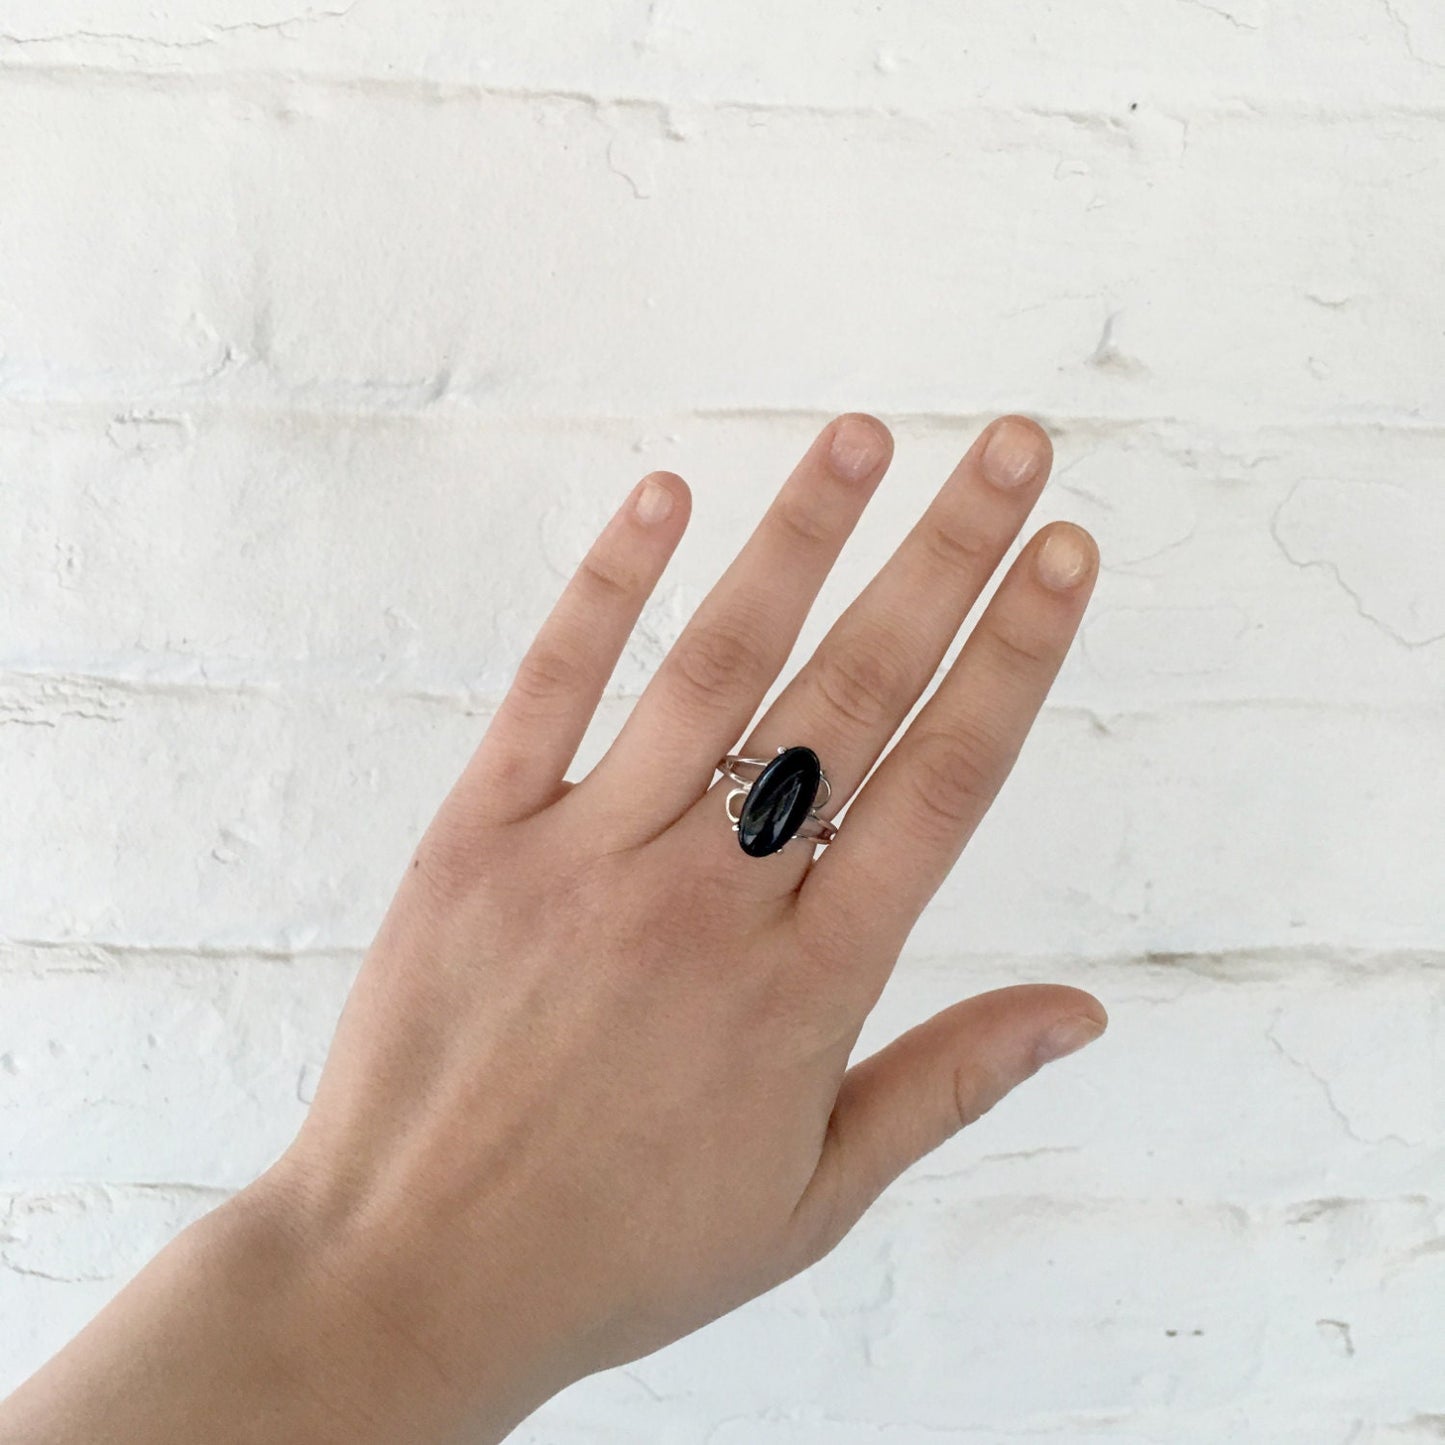 Vintage Ring Genuine Onyx 18k White Gold Silver Cocktail Ring Womans Antique Handmade Onyx Jewlery #R1846 - Limited Stock - Never Worn